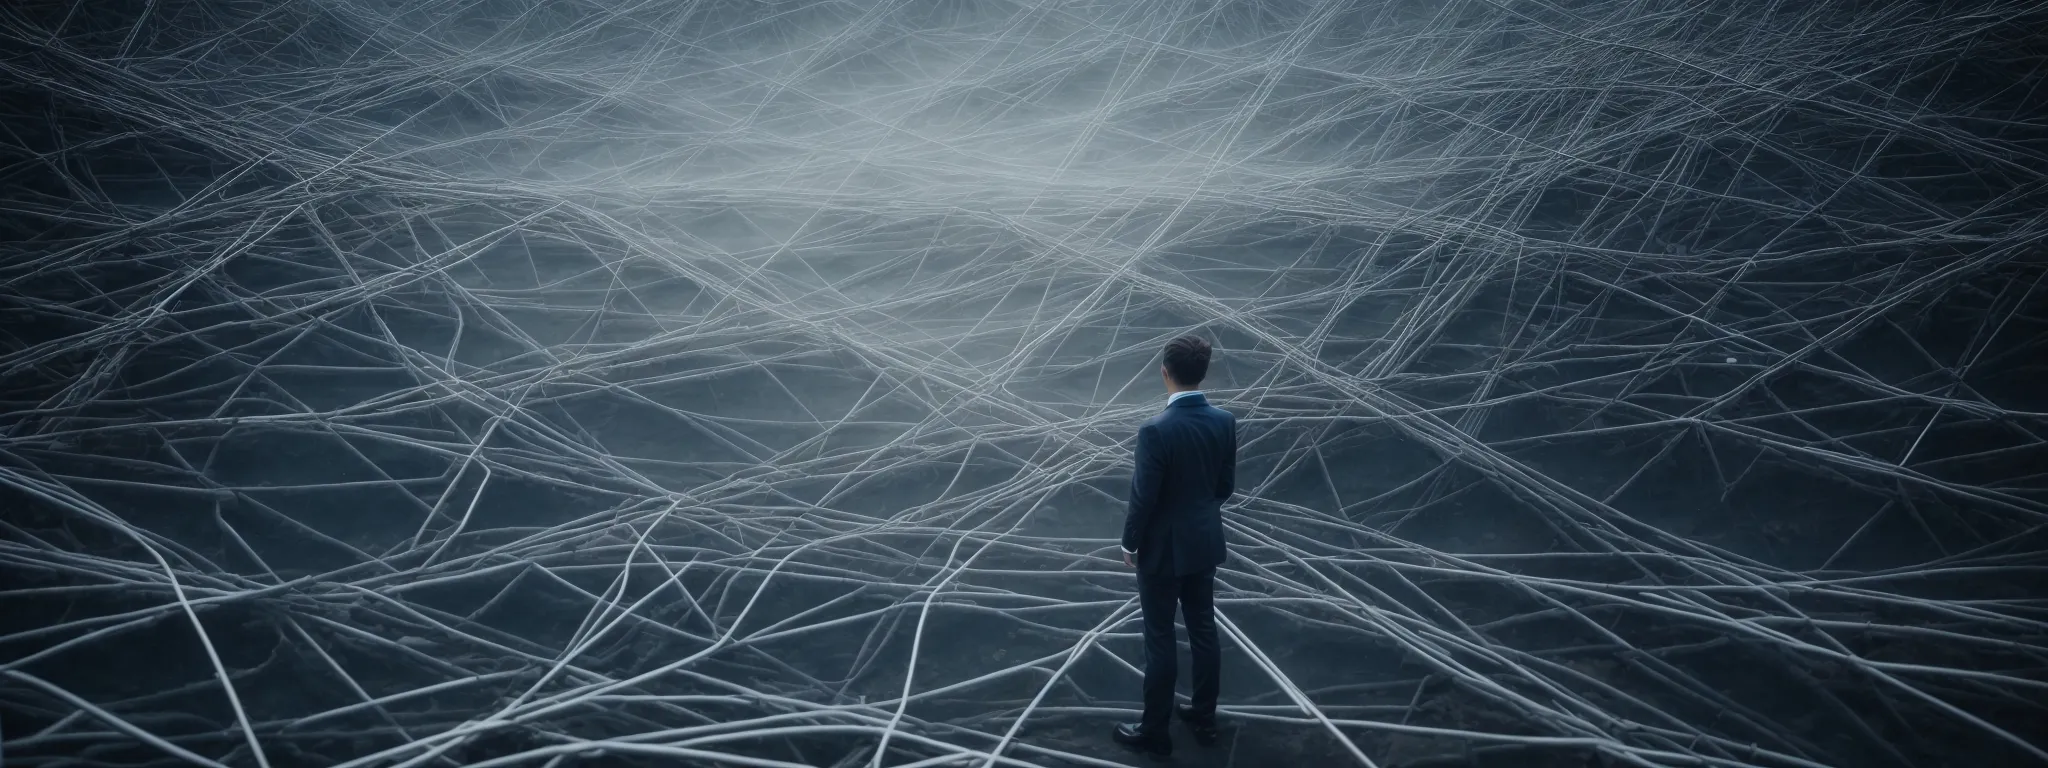 a person stands before a complex network of crisscrossing paths symbolizing the data analytics tools landscape.